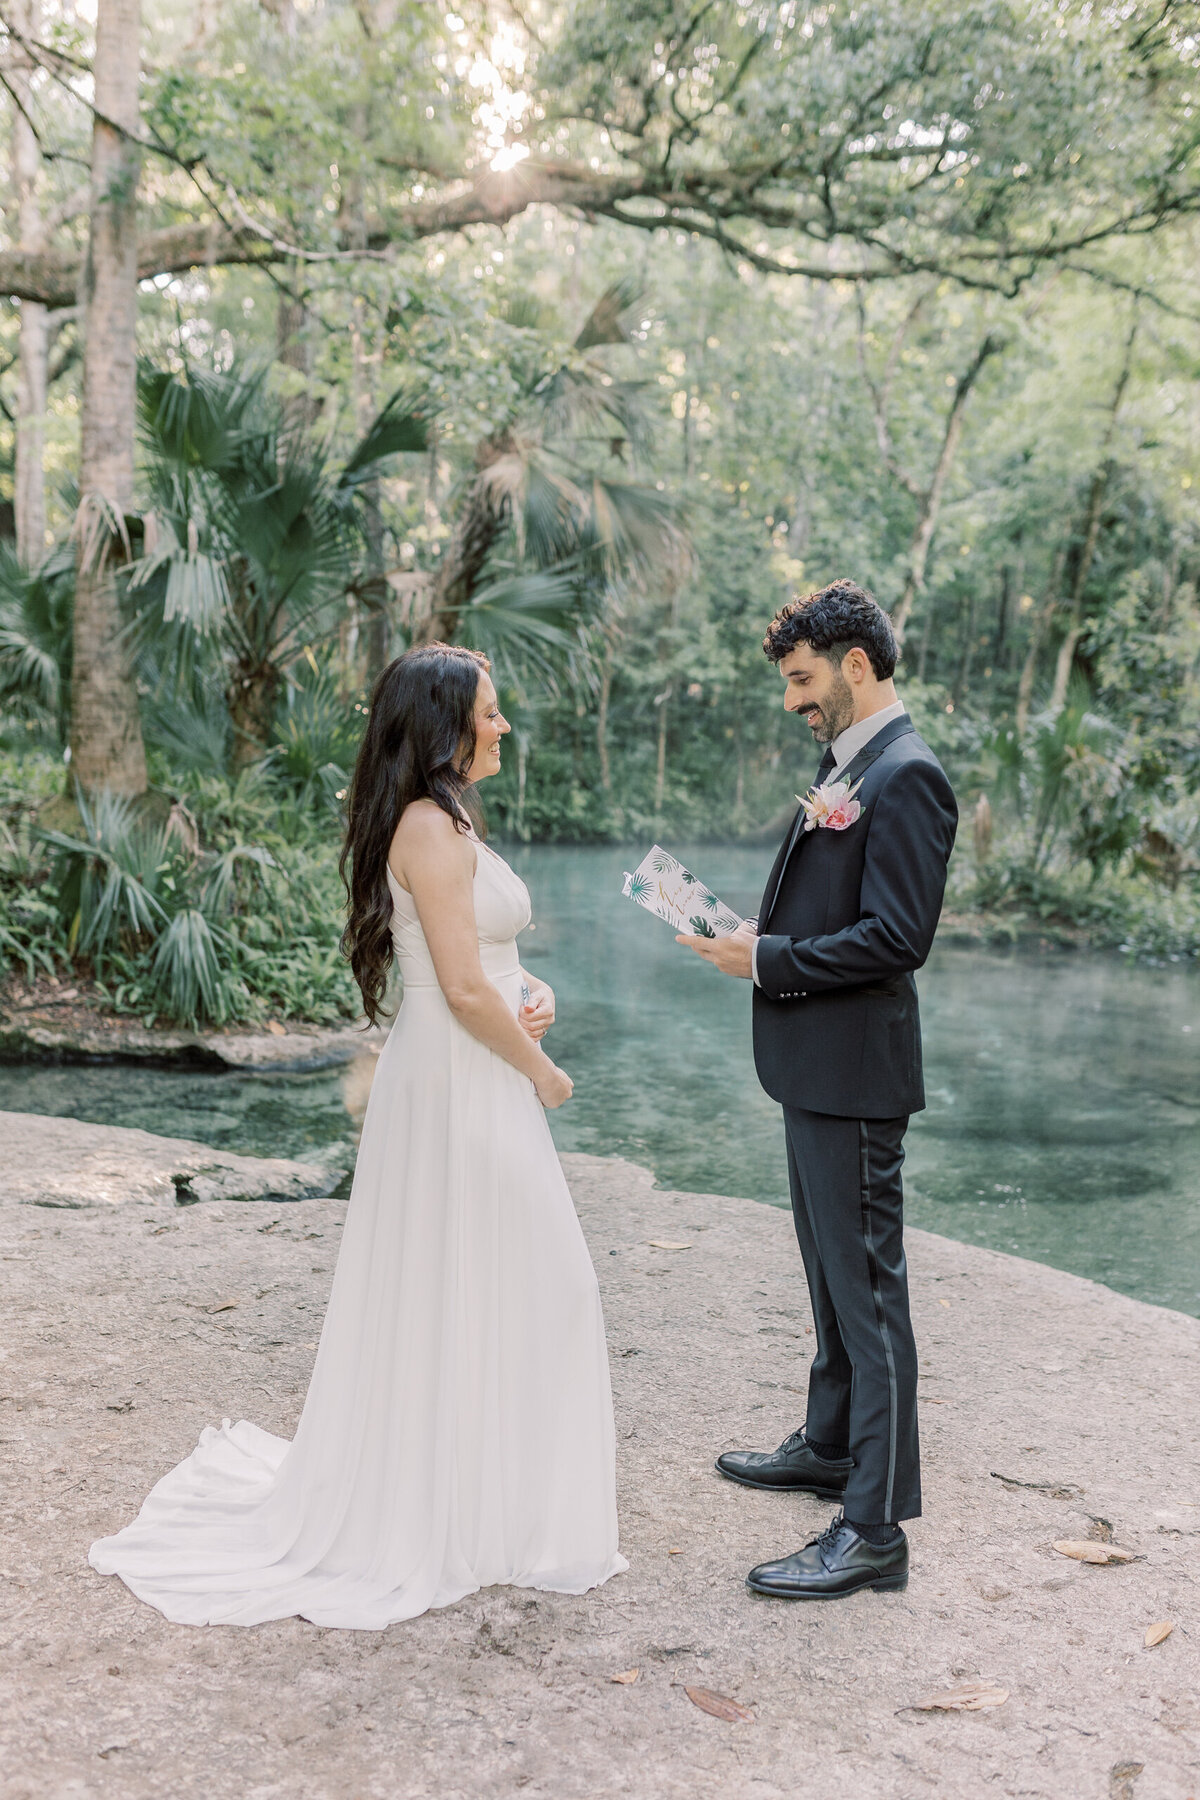 Bride and groom exchanging vows during their private ceremony at Kelly Park by the natural spring in Florida.